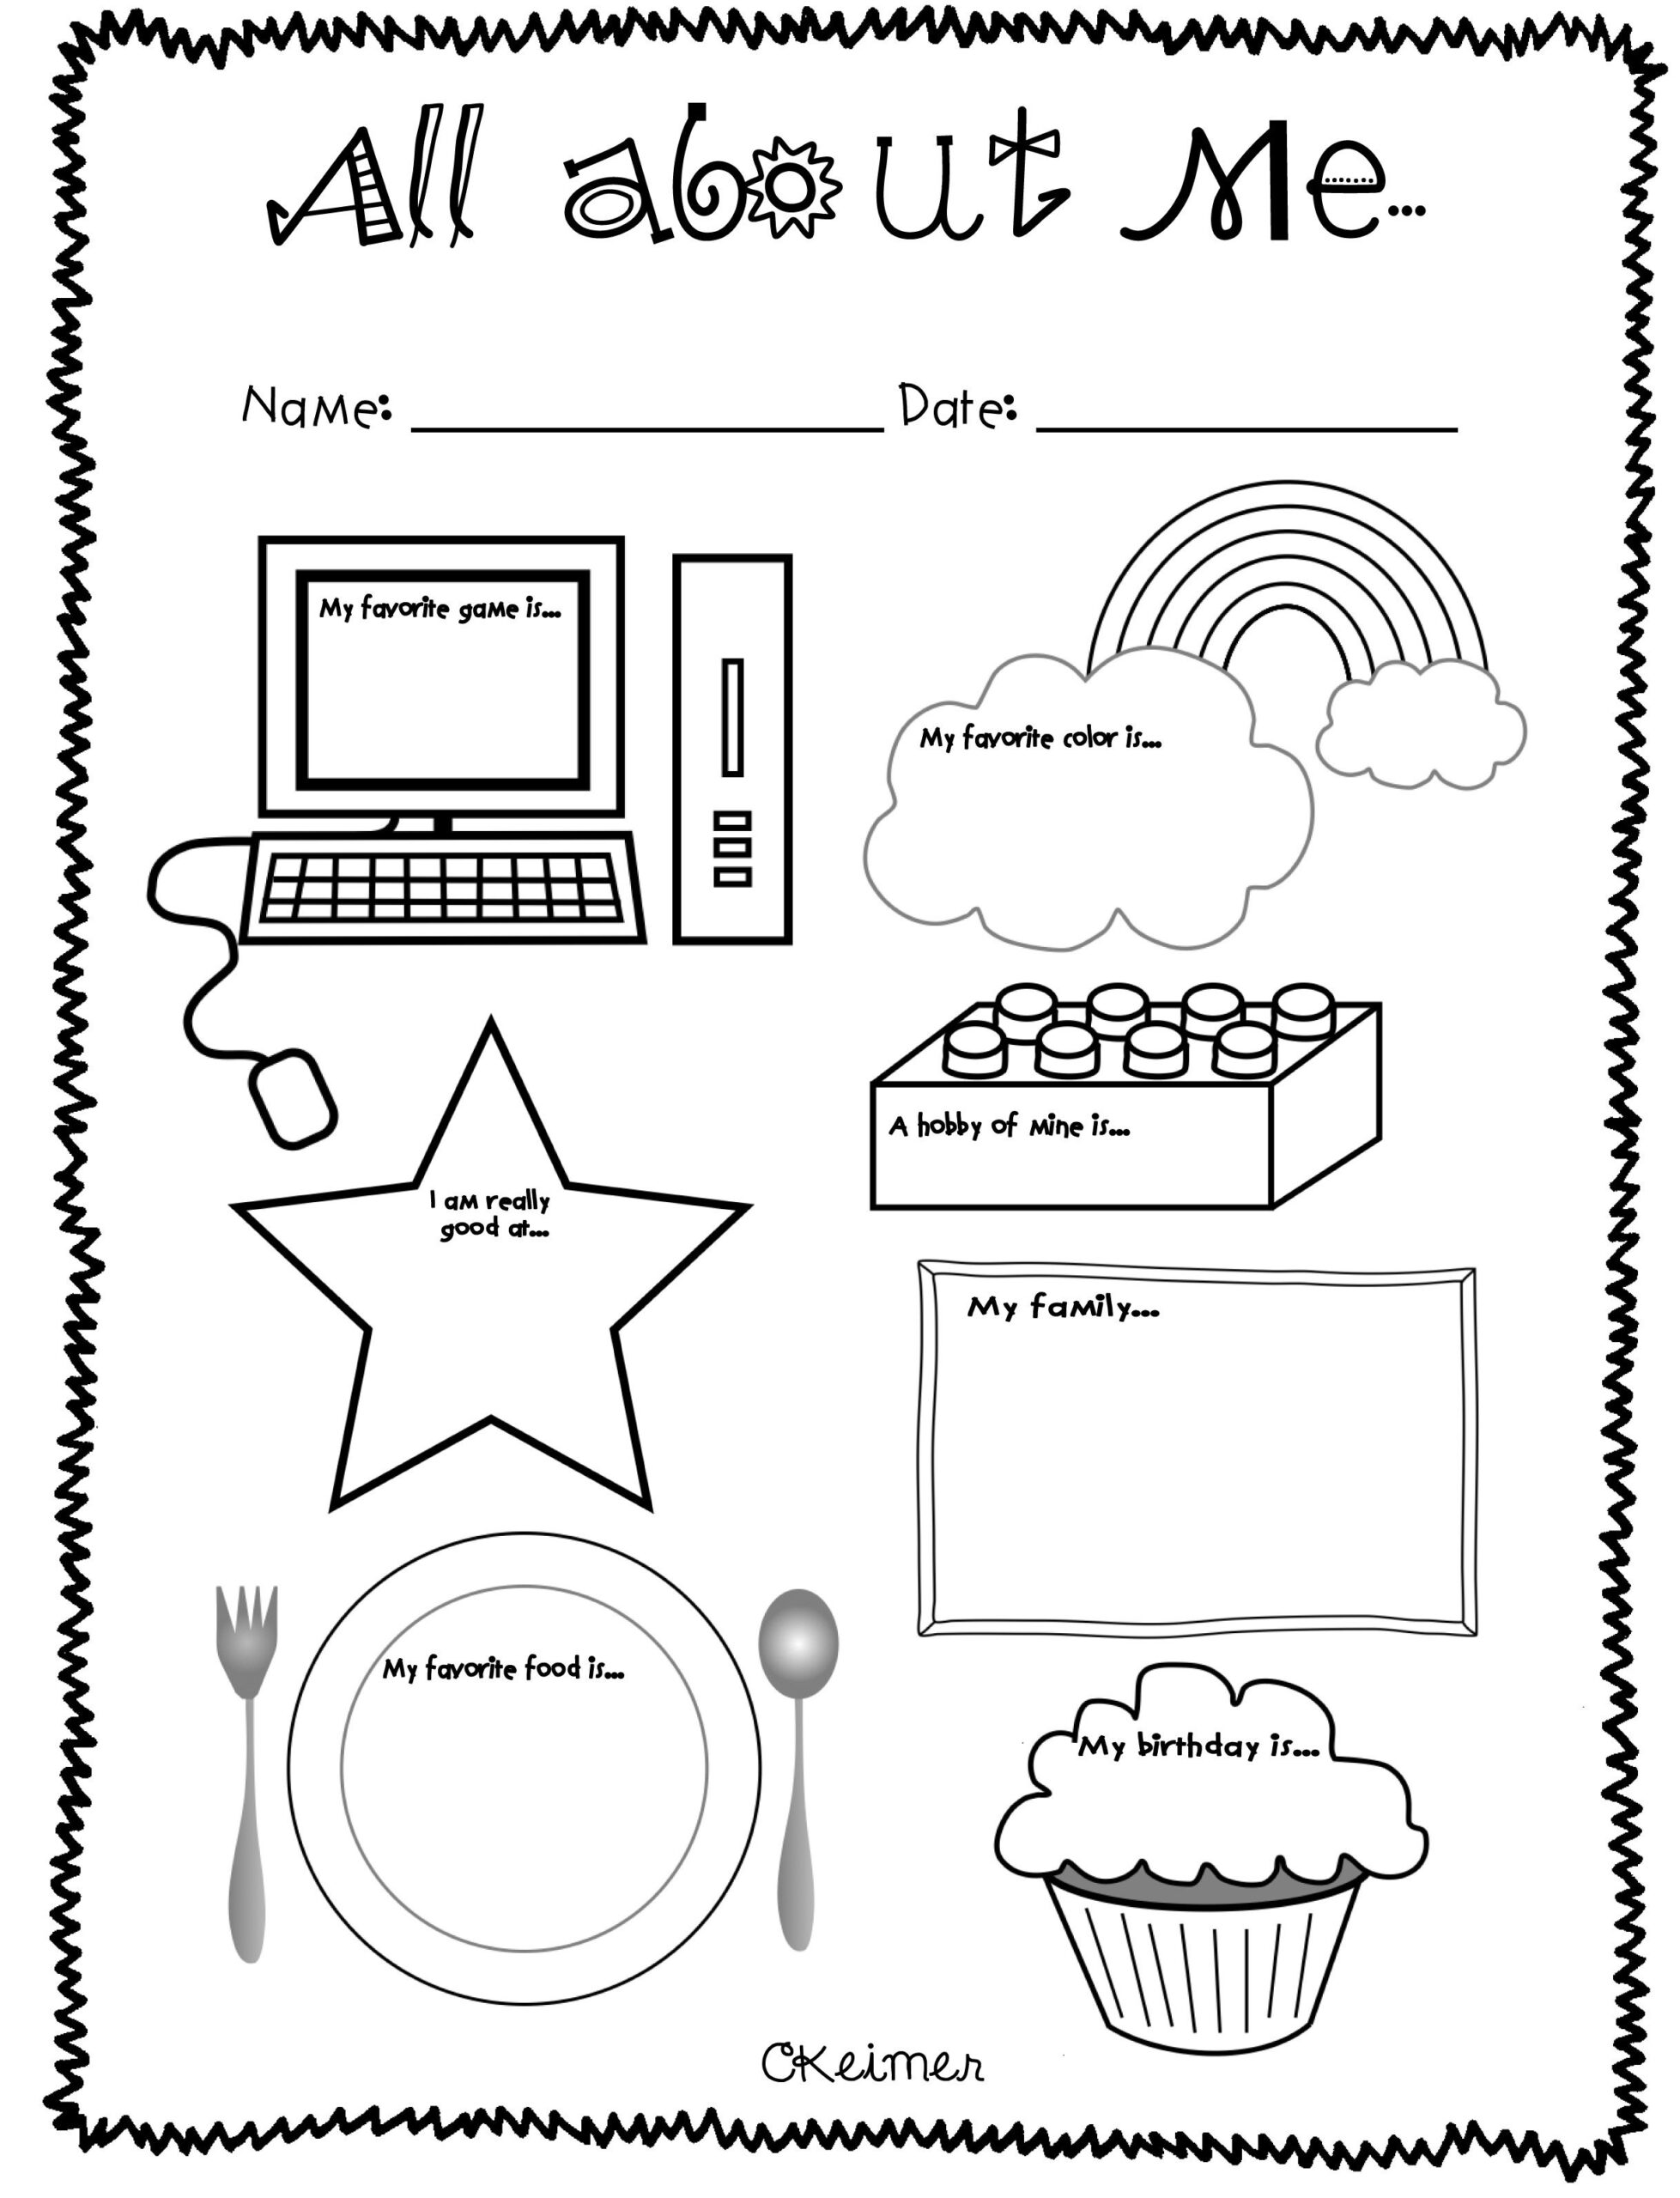 All about me getting to know students 2 Kindergarten Worksheets 